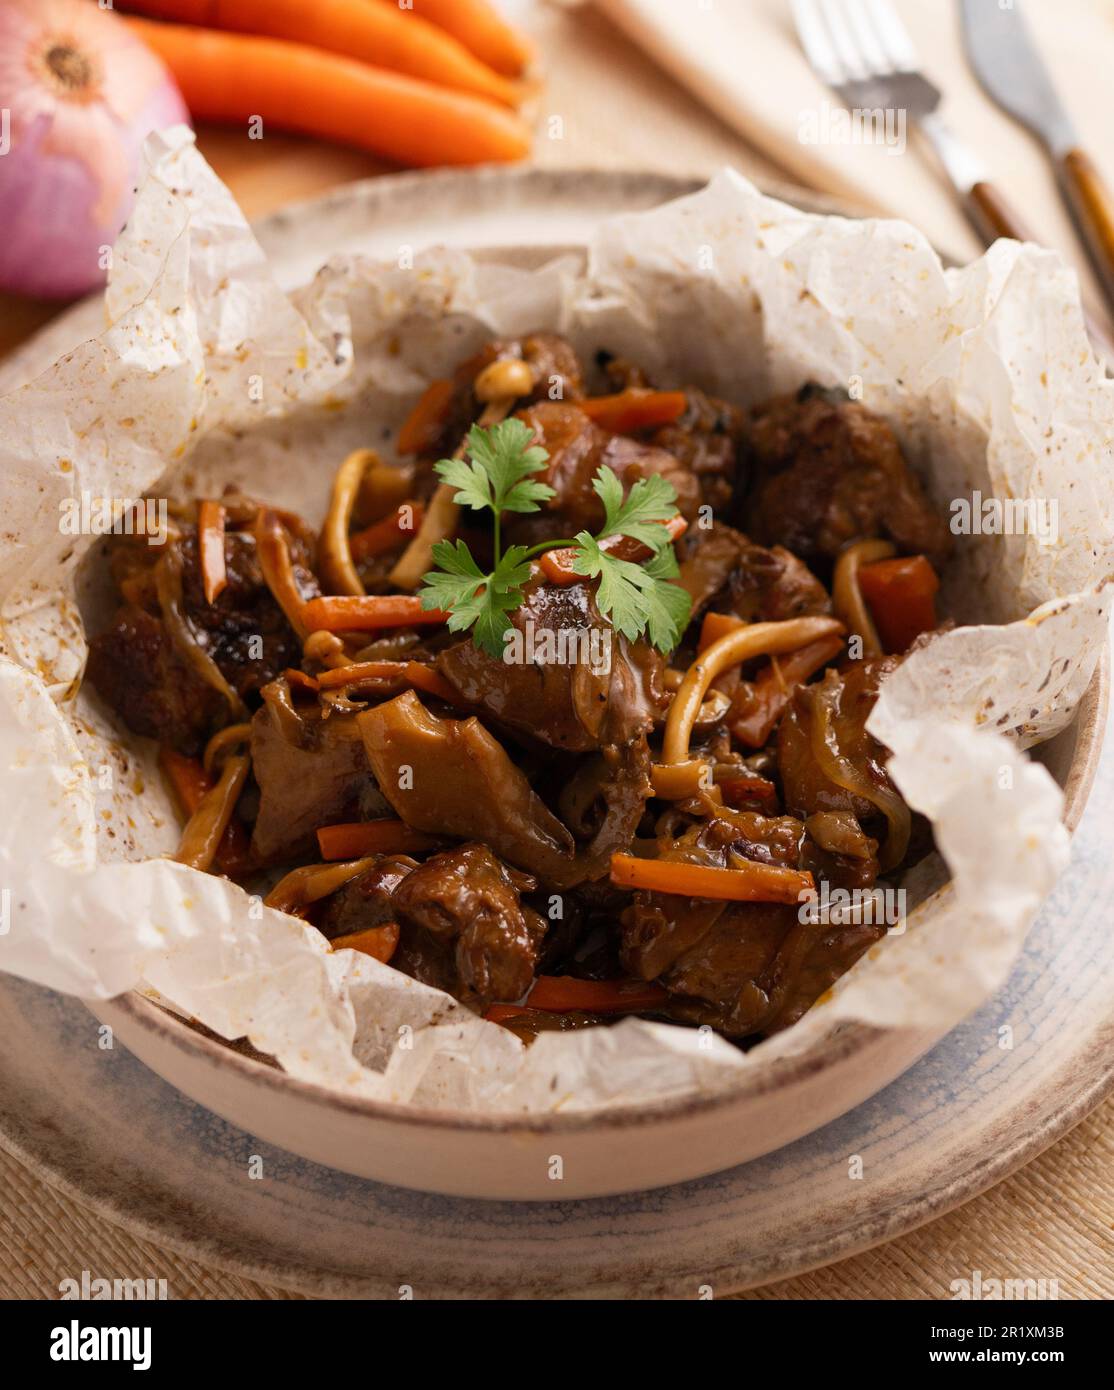 Lamb cooked in papillote with vegetables. Stock Photo